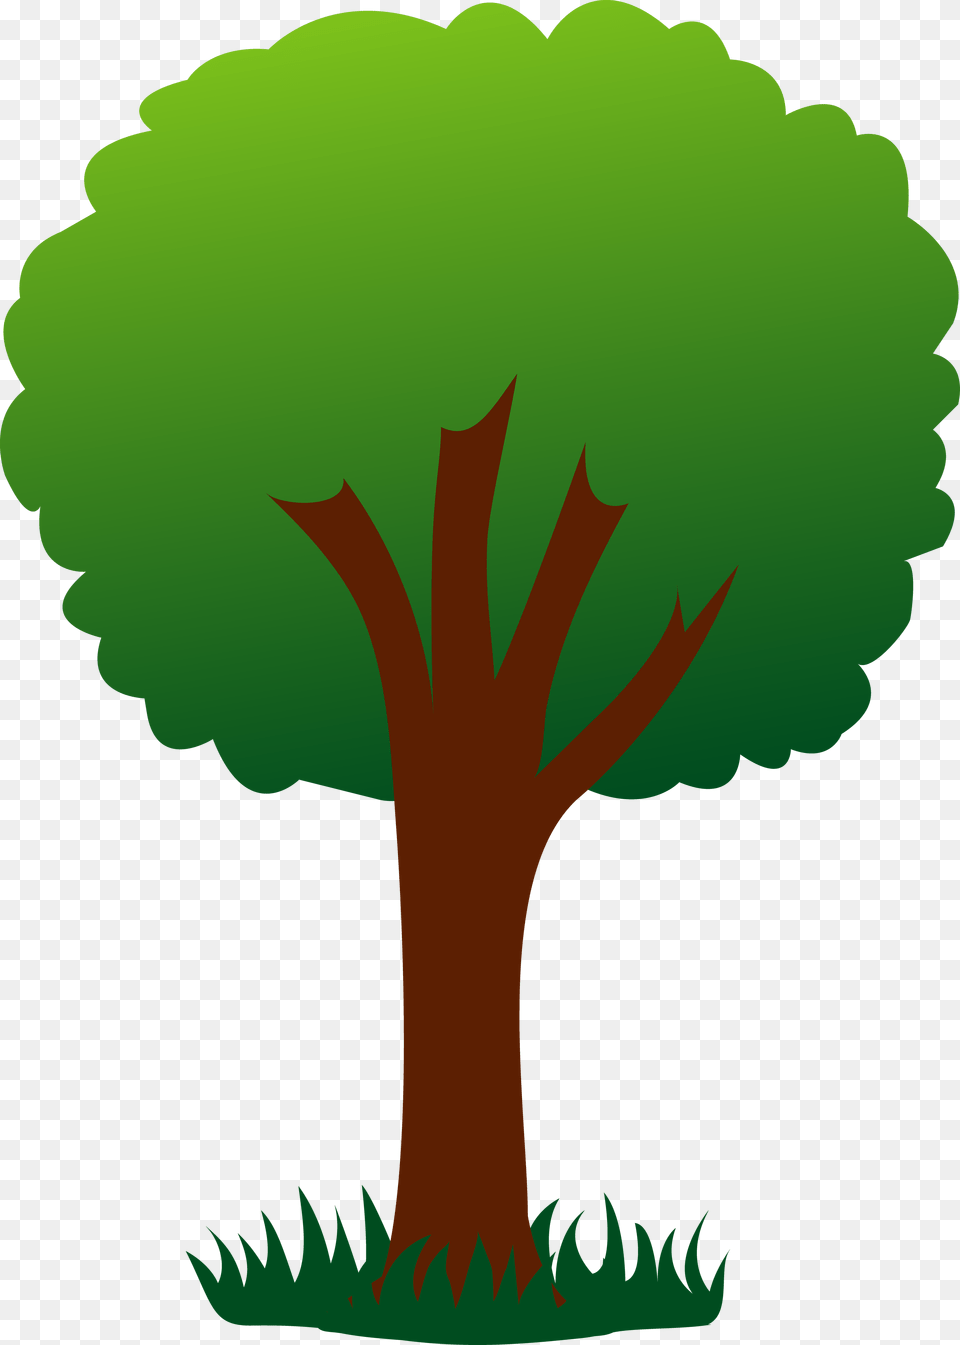 Tree, Green, Palm Tree, Plant, Leaf Png Image